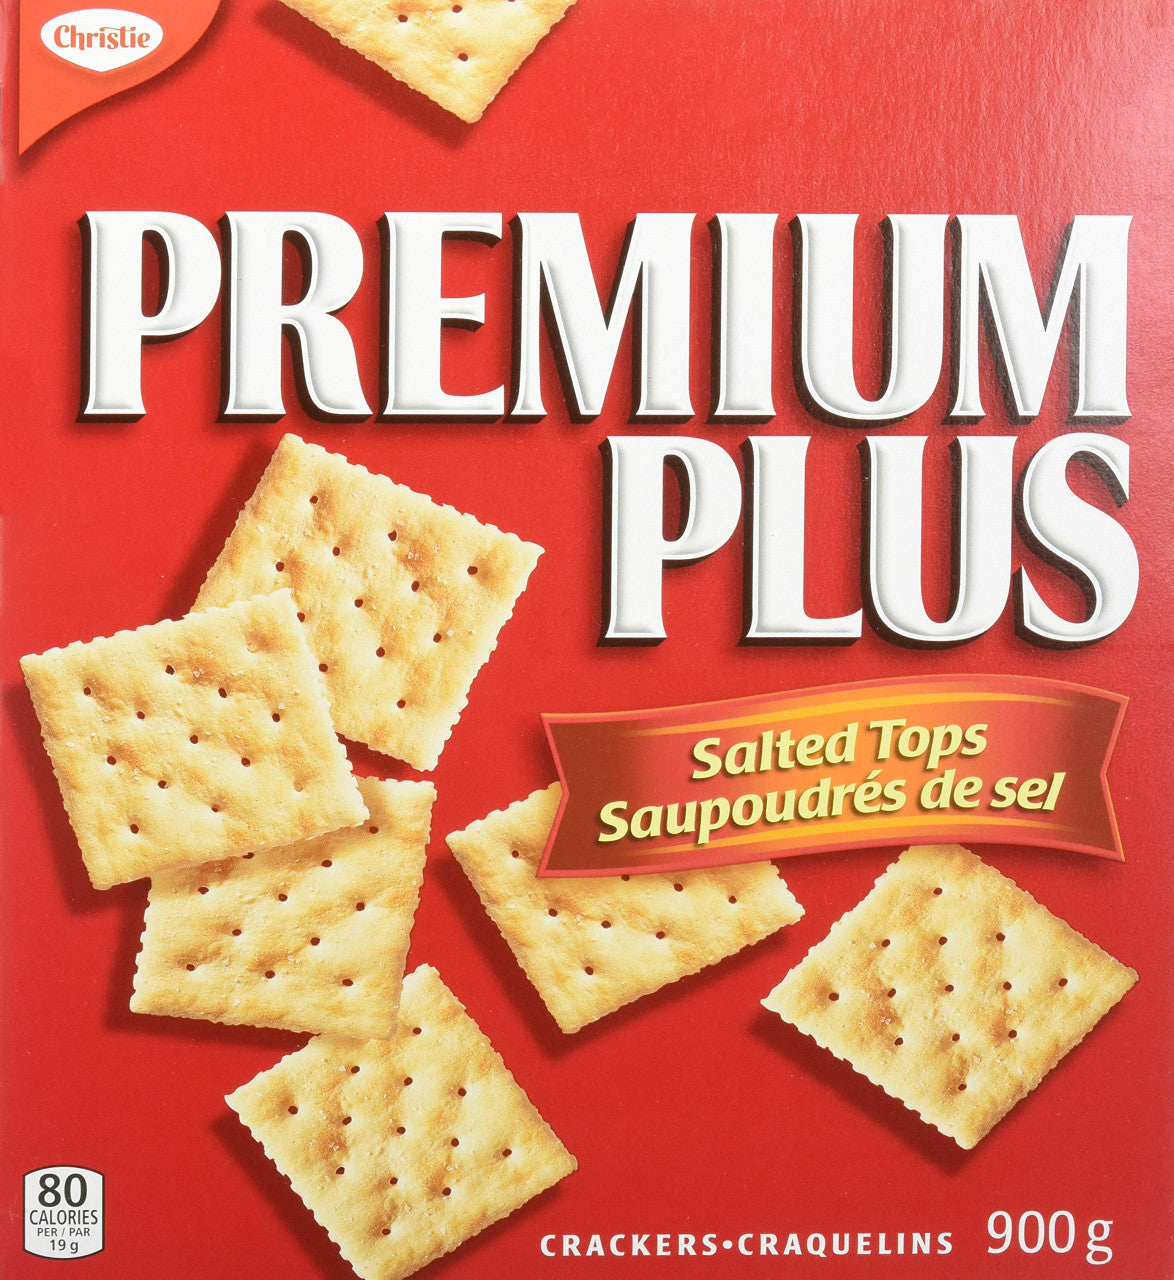 Christie Premium Plus, Crackers with Salted Tops,900g/2 lbs., {Imported from Canada}